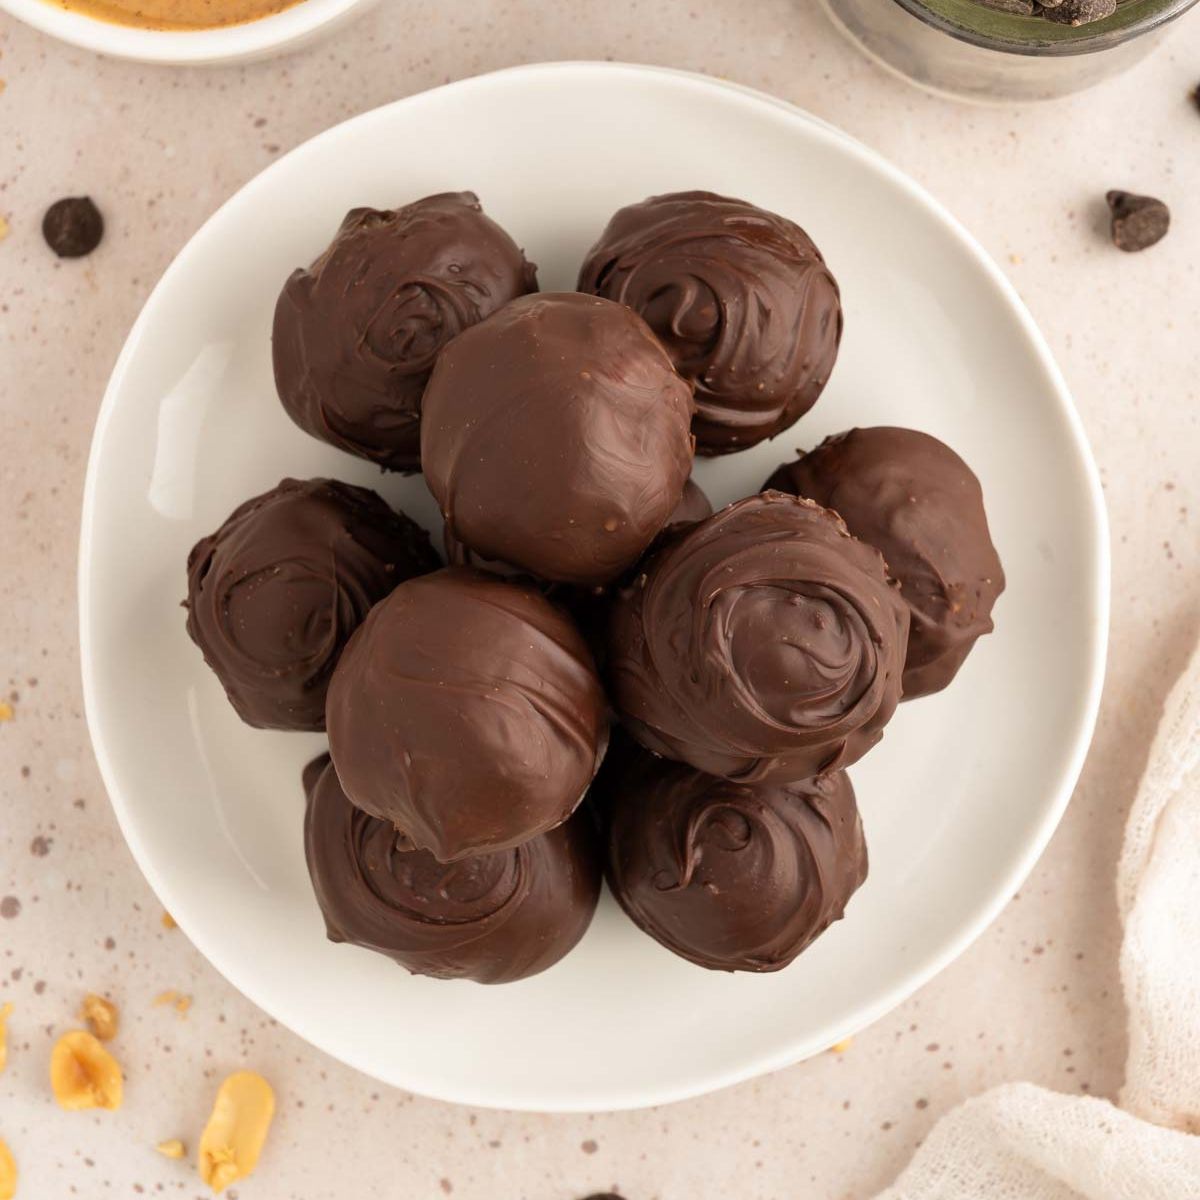 Chocolate-covered cookie dough balls on a plate.